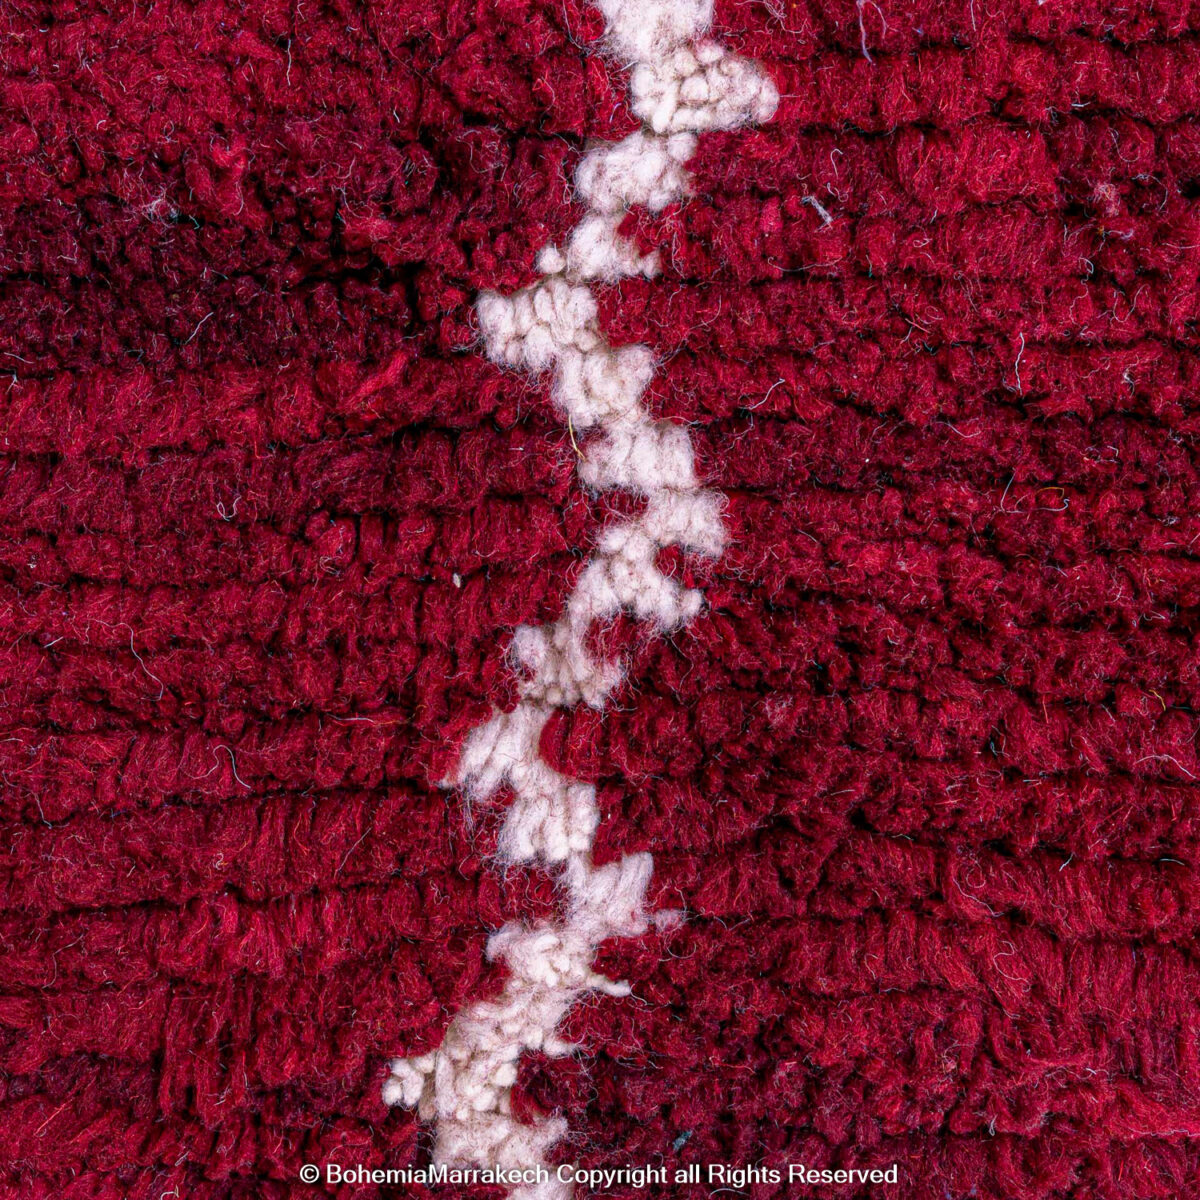 rugs in home style carpet berber area rugs custom made rugs wool shag rug wool rugs for sale rugs cheap blue checkered rug large carpet 8 x 11 rug oversized area rugs 7 x 9 rug red vintage rug house rugs best place to buy area rugs near me berber carpet prices rug styles 4 x 5 rug rugs website custom made carpet custom made carpet rugs berber carpet area rugs rugs for house whole sale rugs vintage rug red wool shag carpet rugs bright red rug vintage berber area carpet shaggy wool carpet wool rug shag berber carpet costs big rug for cheap living room rug small area rug textures differences between rug and carpet shag wool moroccan shag rug moroccan area rug beautiful rugs buy rugs online nice rugs the rug store modern wool rugs decorative rugs 7 by 9 rug large area rugs near me huge rugs knotted rug rugs modern